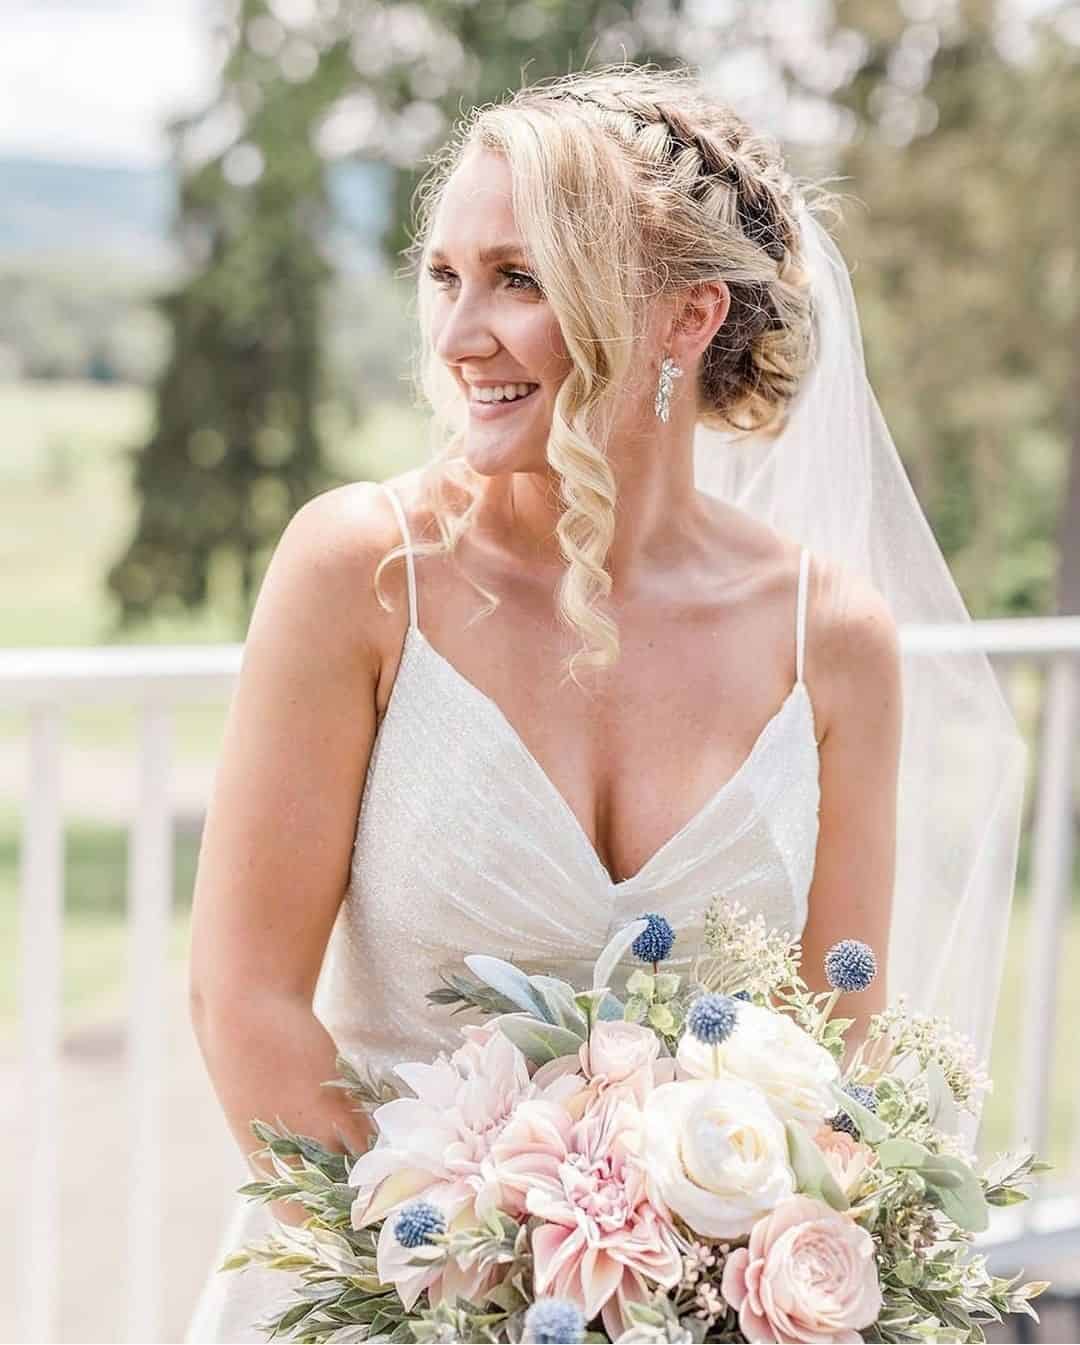 Braided Wedding Hairstyle With Veil